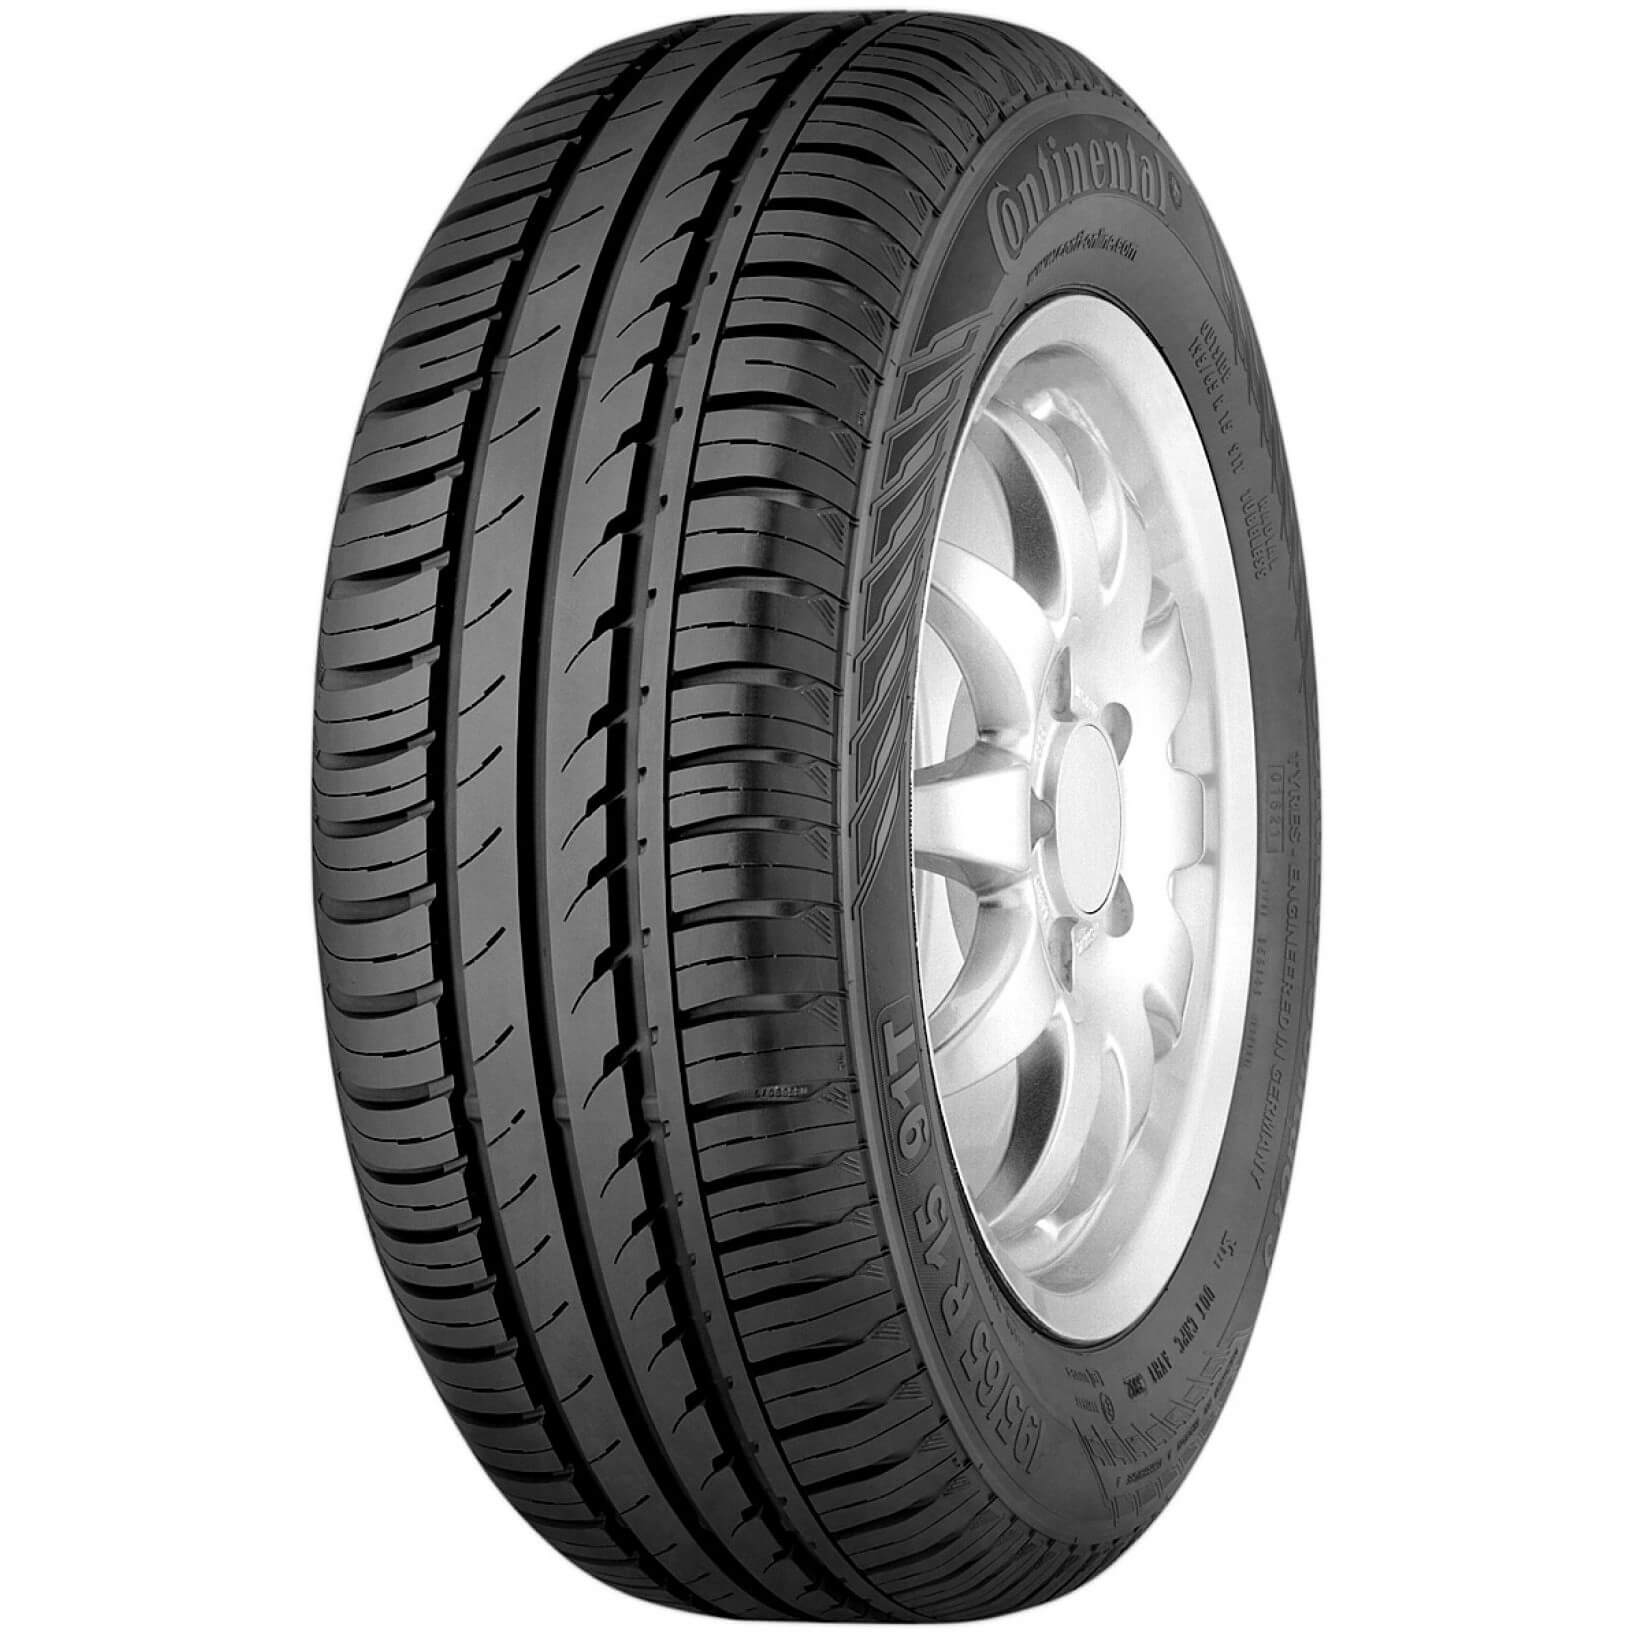  Anvelope Vara Continental Contiecocontact 3, 155/80R13 79T 